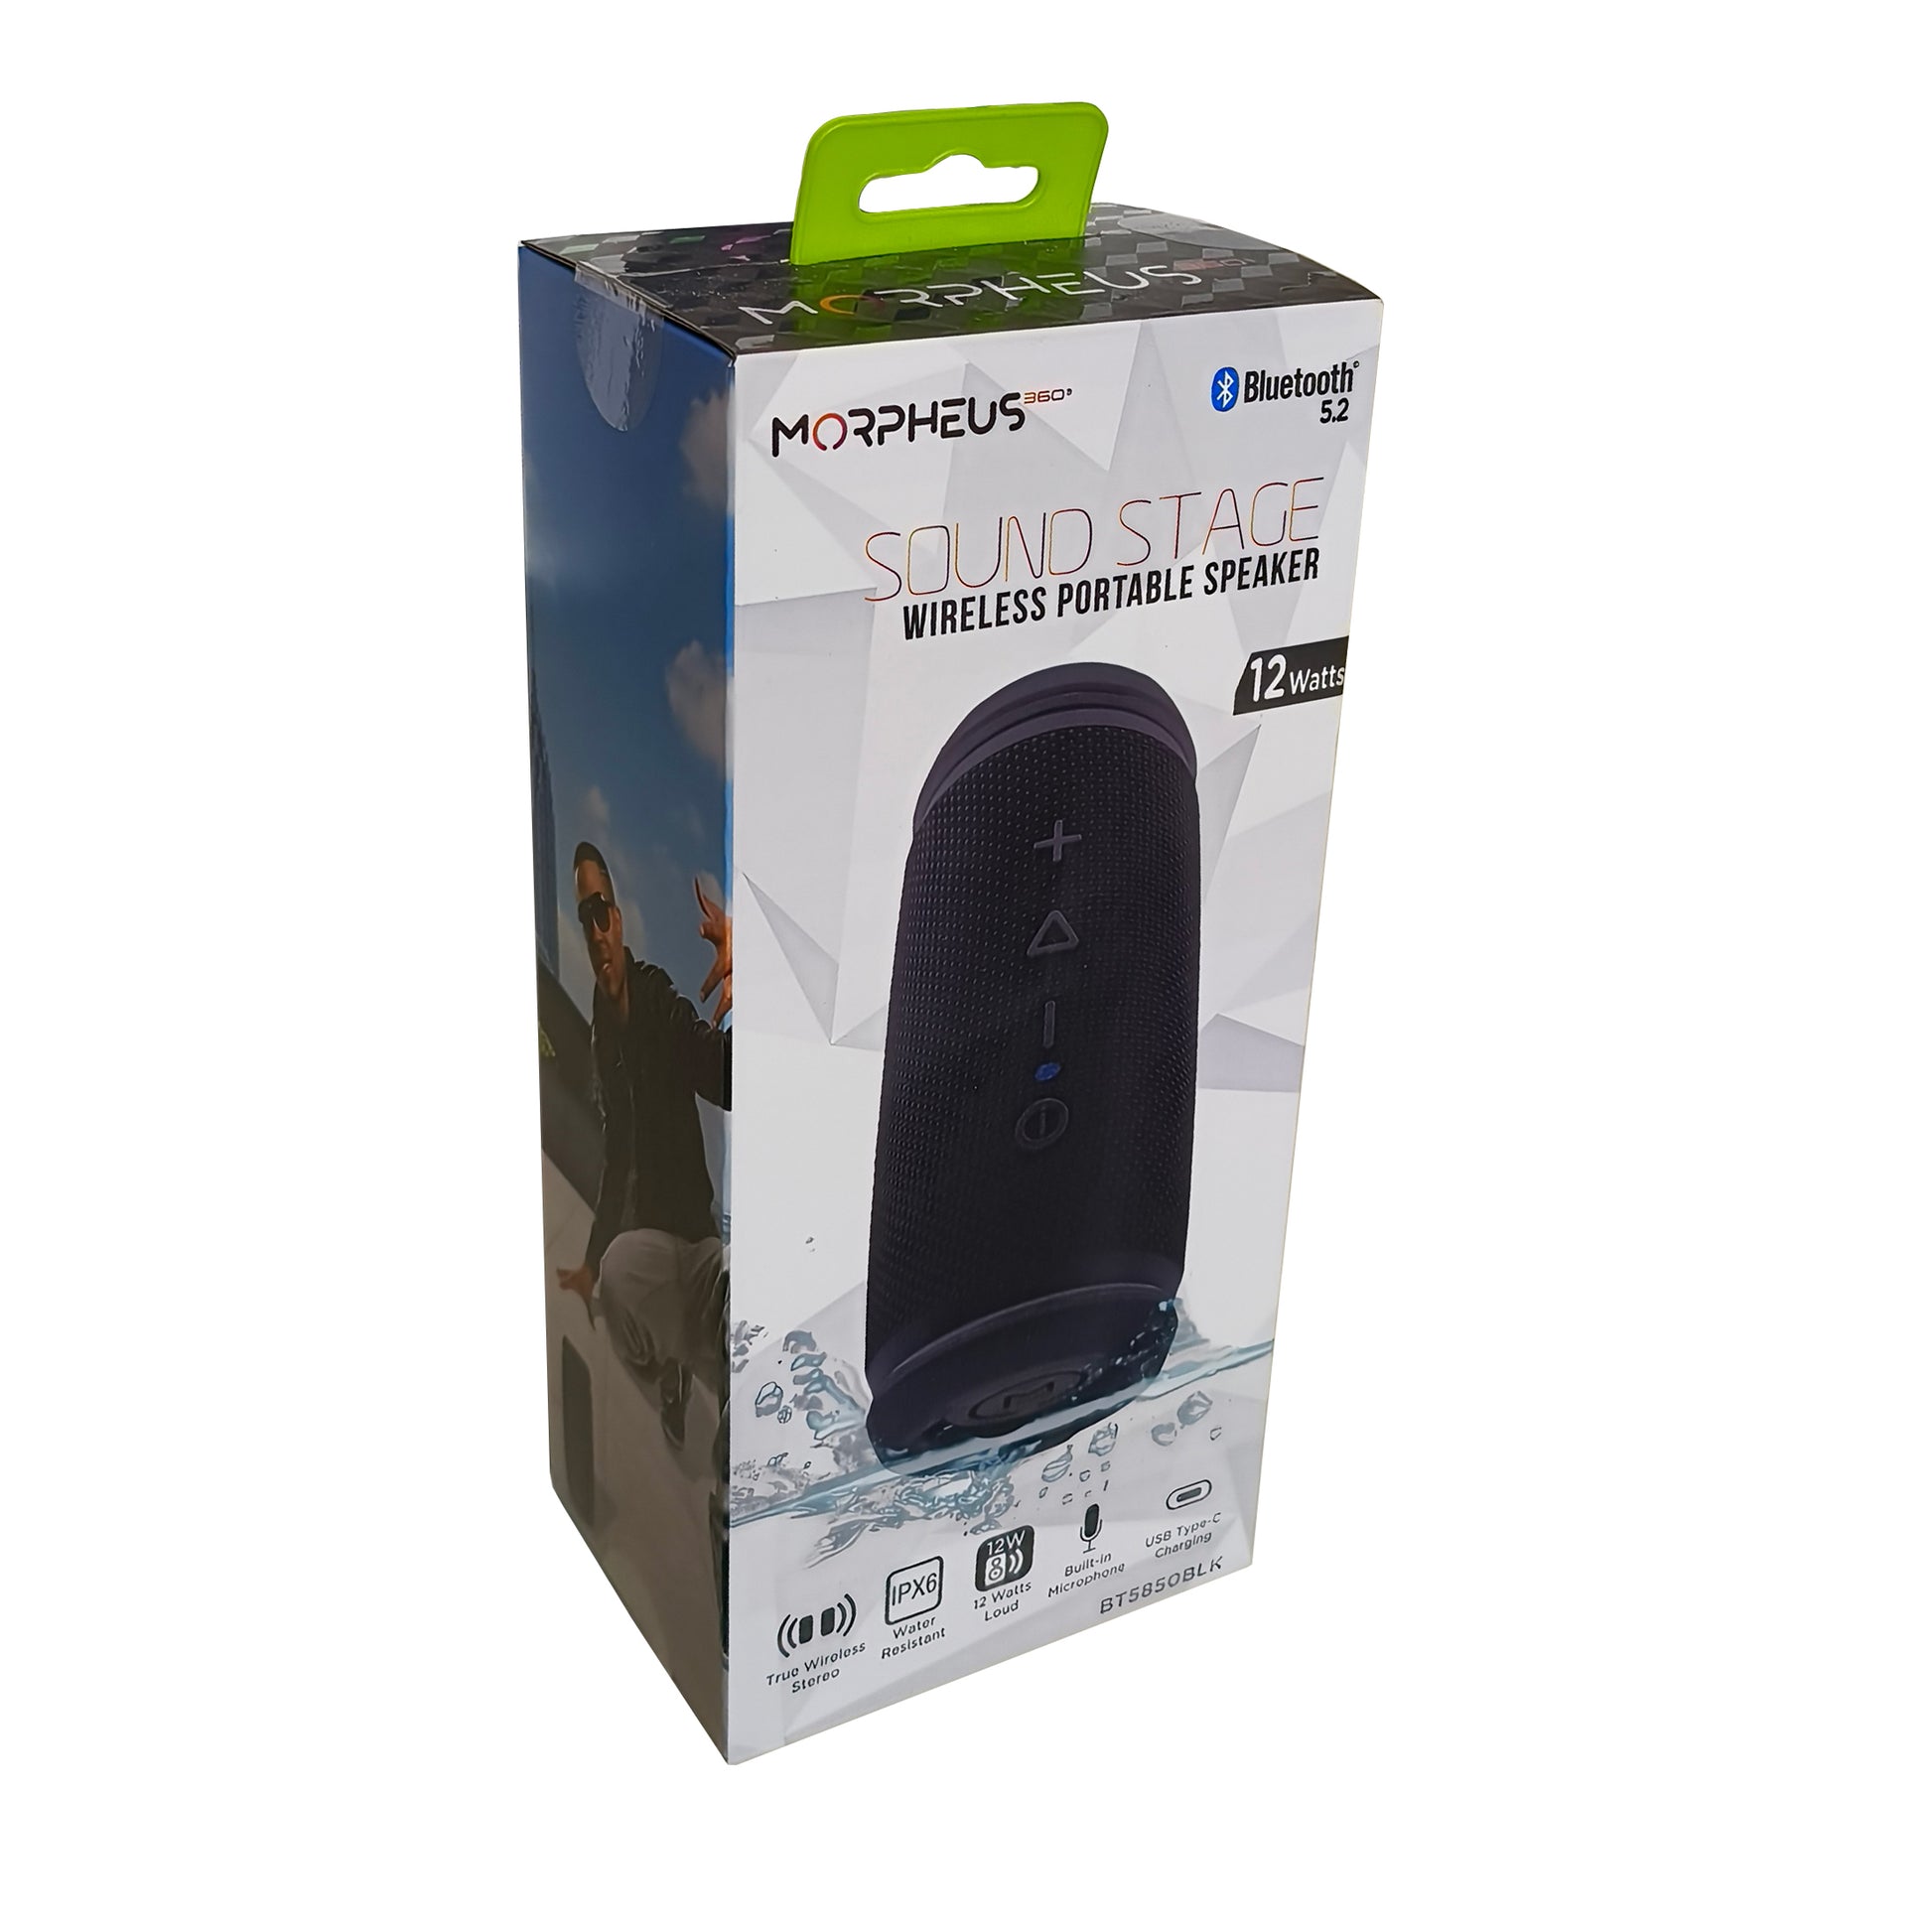 Photo of Morpheus 360 Sound Stage Wireless Bluetooth Speaker Retail packaging with features: Bluetooth 5.2, 12 Watts, True Wireless Stereo, IPX6 Water Resistant, Built-In Microphone, USB Type-C Charging.